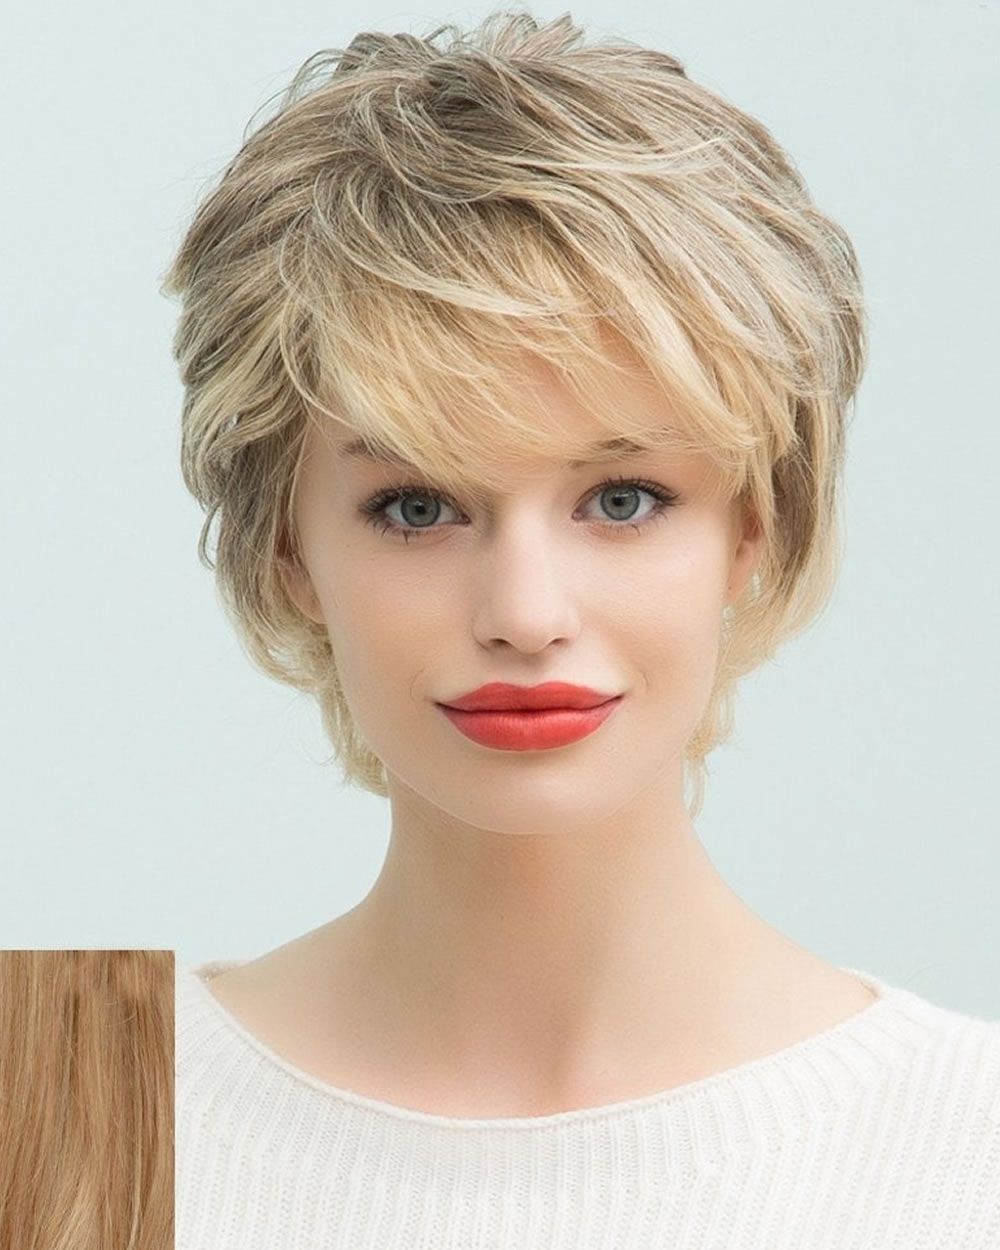 25 Top Very Short Hair Ideas & Short Bob+pixie Hairstyles For With Regard To Latest Short Bob Pixie Hairstyles (Photo 1 of 15)